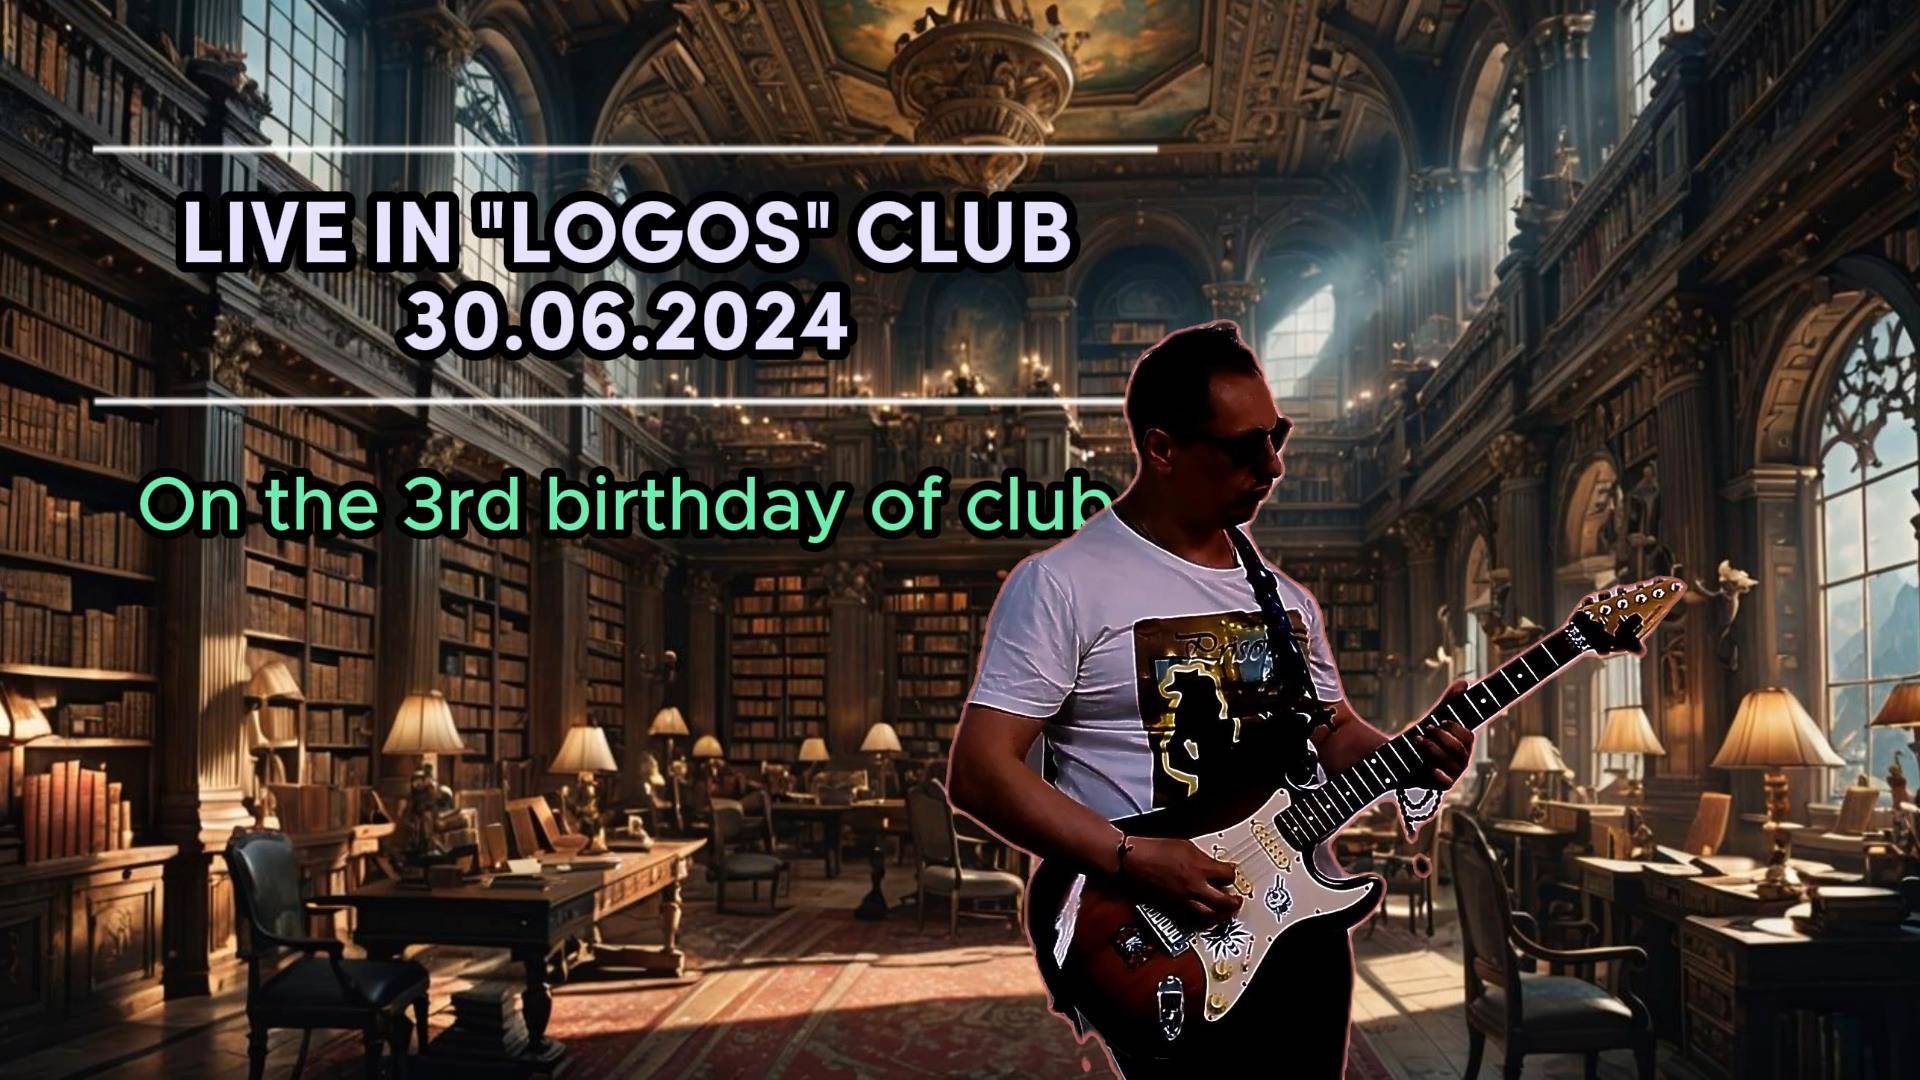 Short live in "Logos" club on his 3rd birthday 30.06.2024